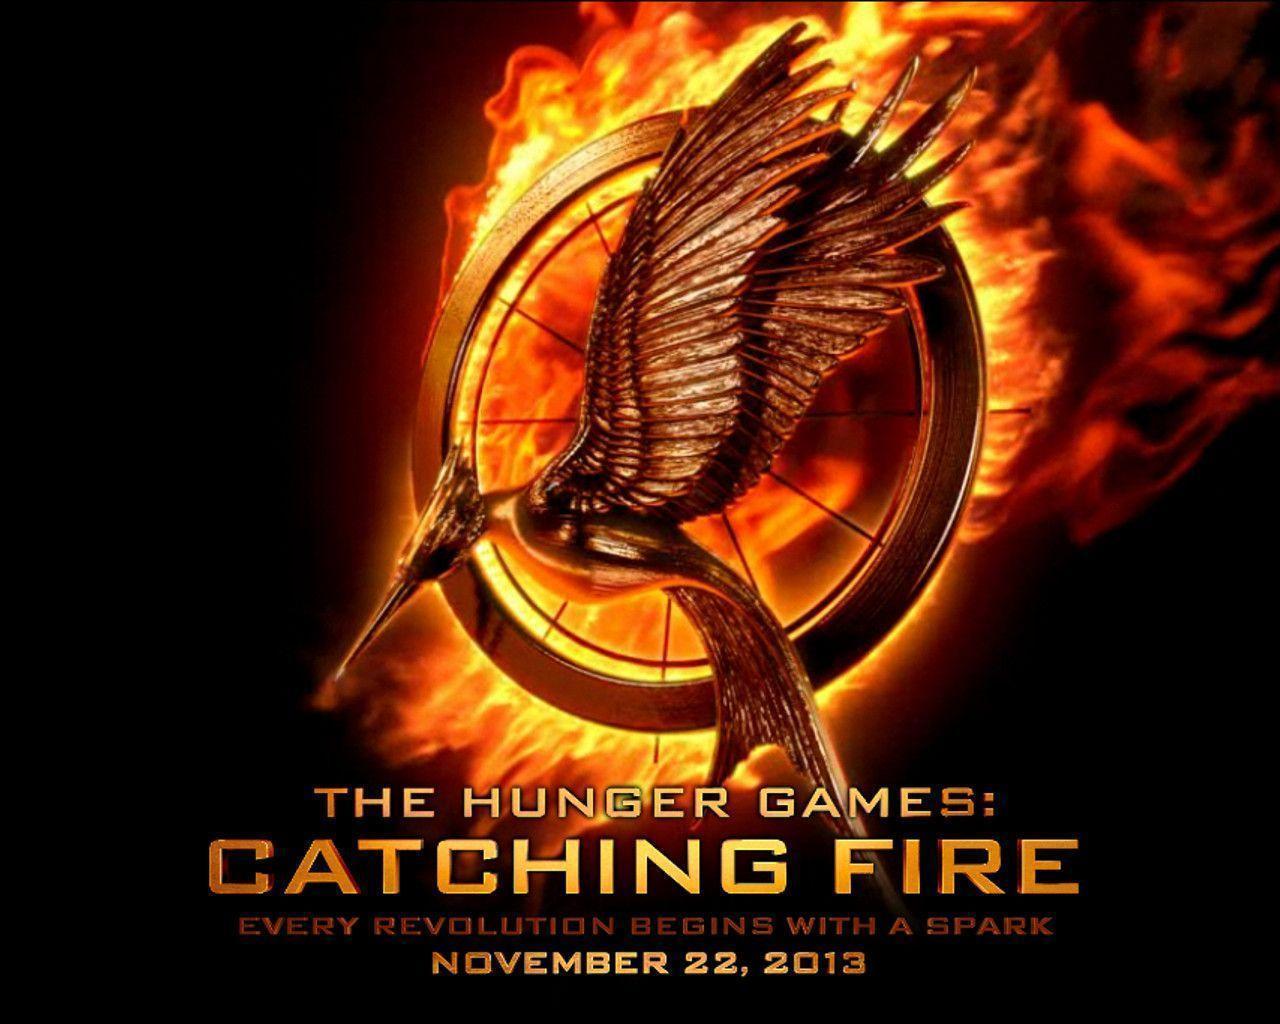 Tuesday: The Hunger Games: Catching Fire